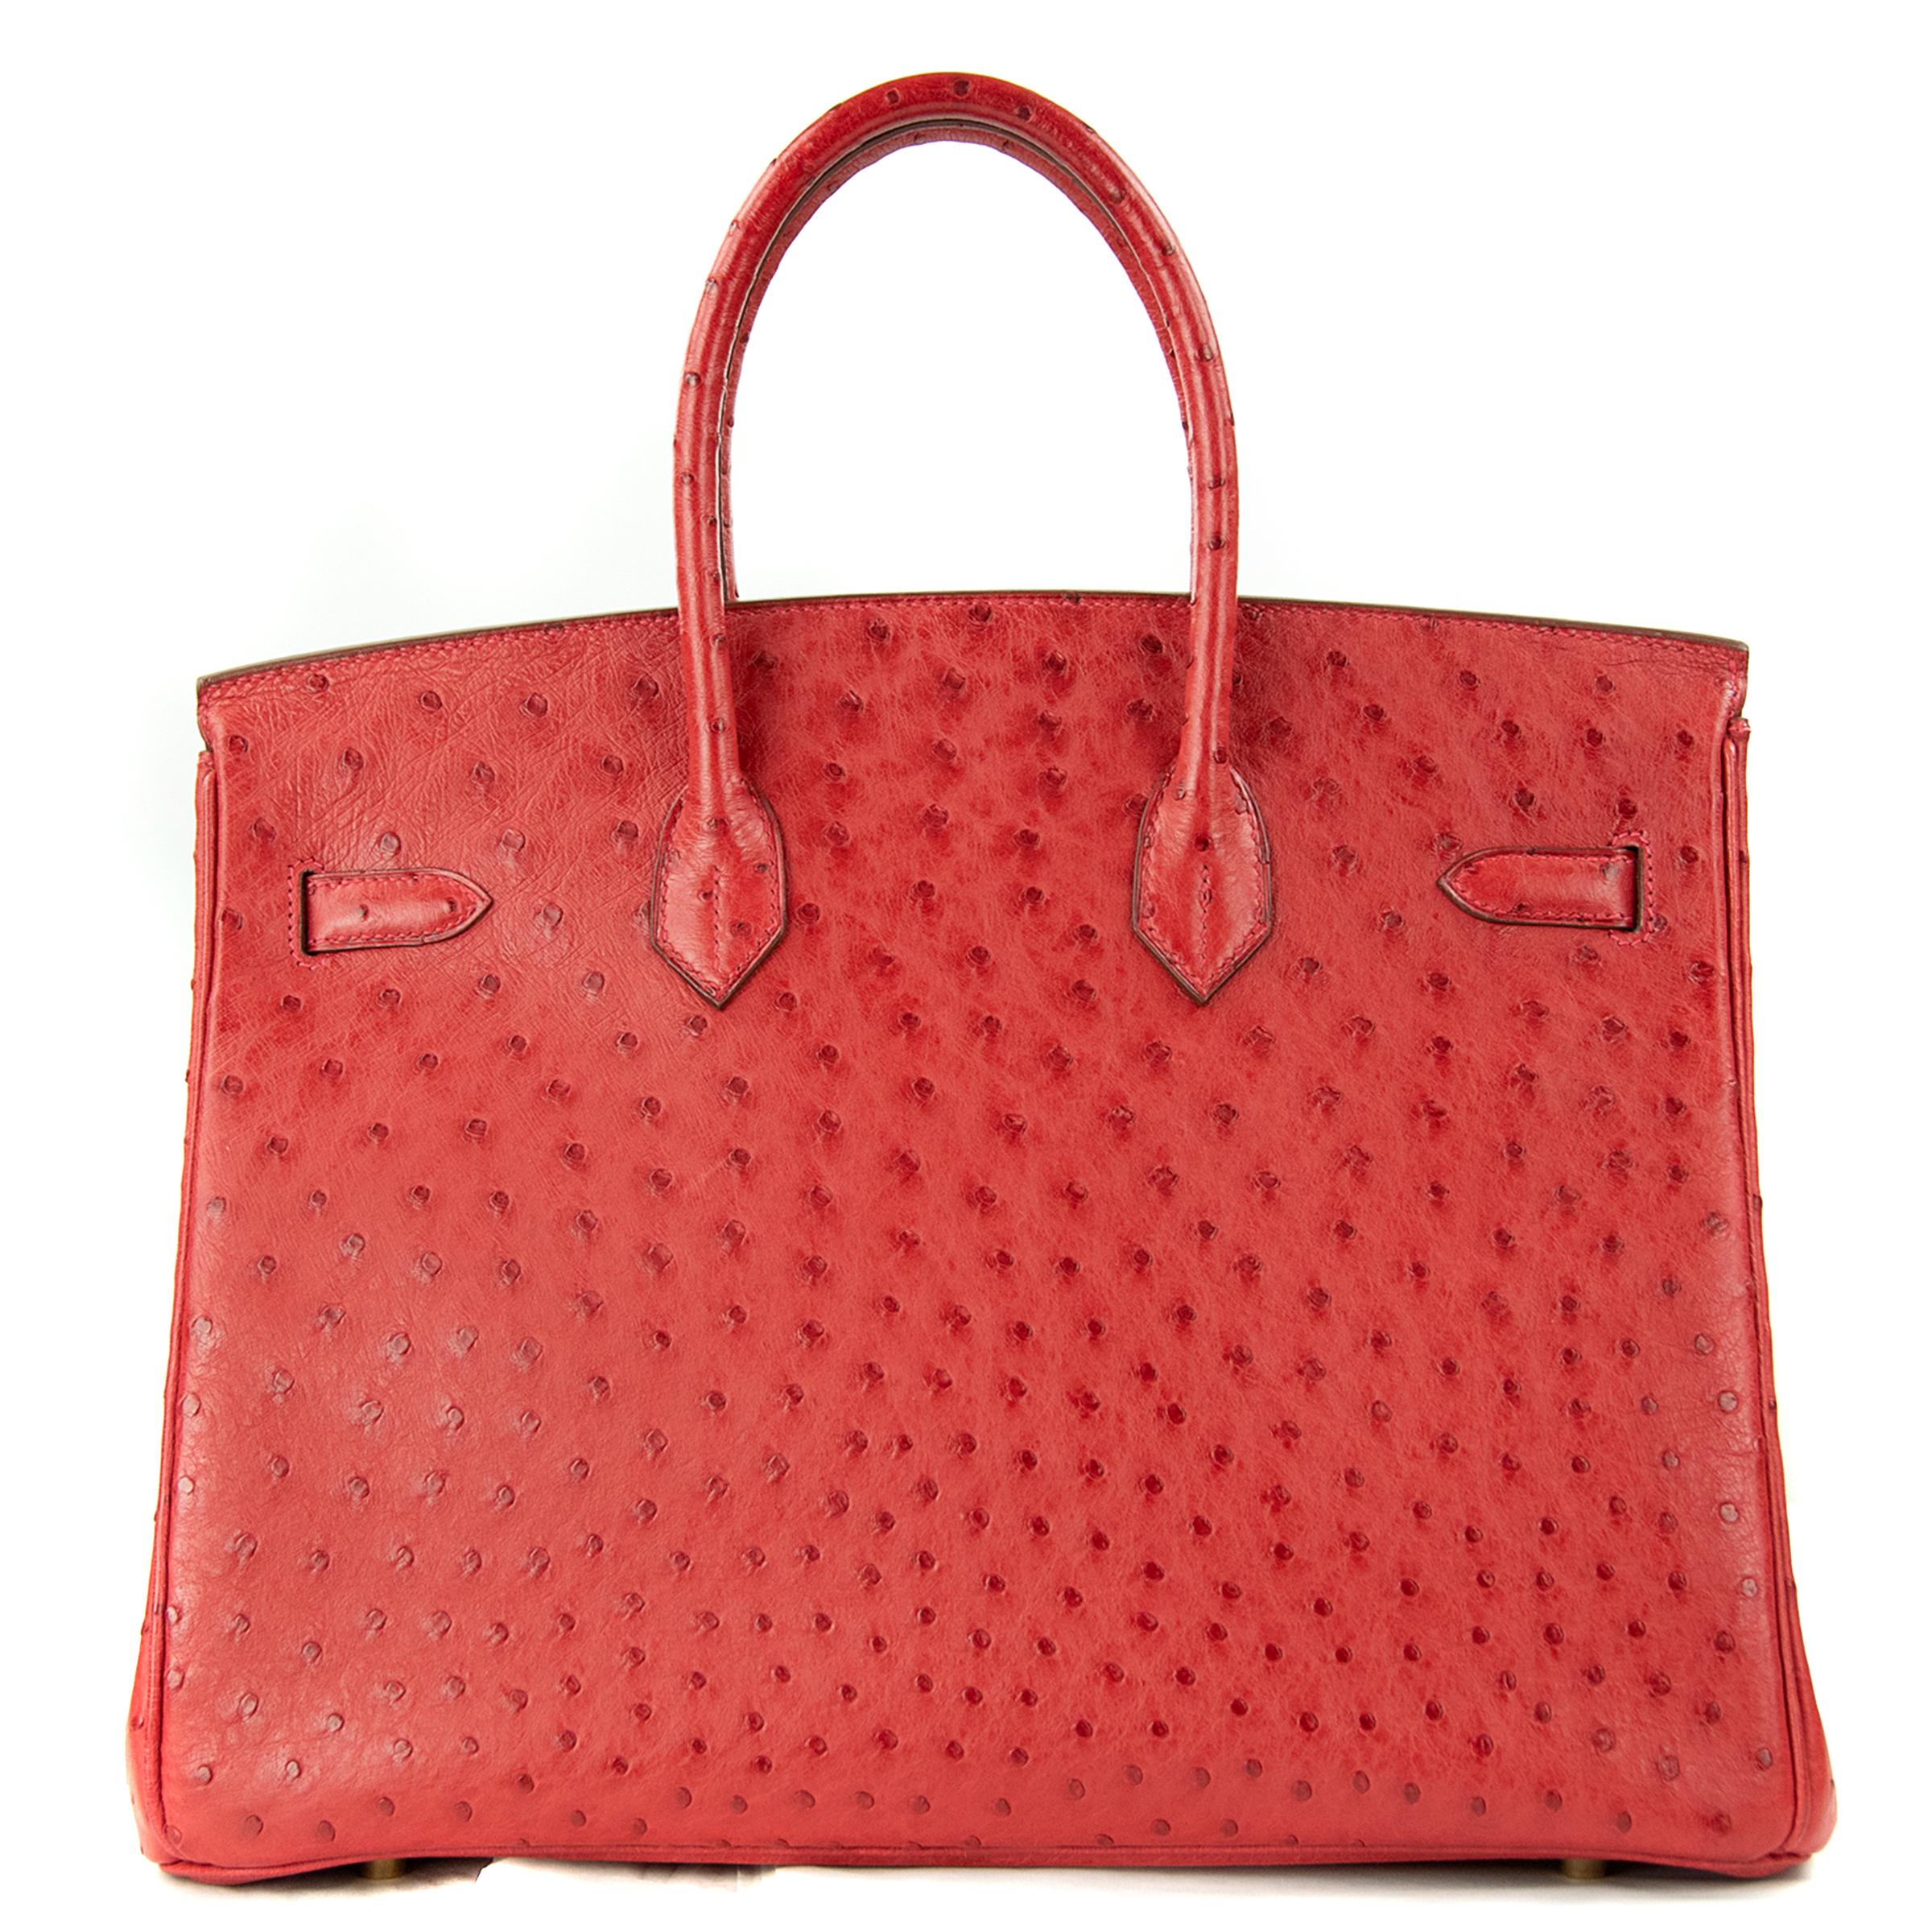 Hermes Birkin 35cm bag in Rouge VIF Ostrich. This iconic special order Hermes Birkin bag is timeless and chic. Fresh and crisp with gold hardware.

    Condition: New or Never Used
    Made in France
    Bag Measures: 35cm (13.8